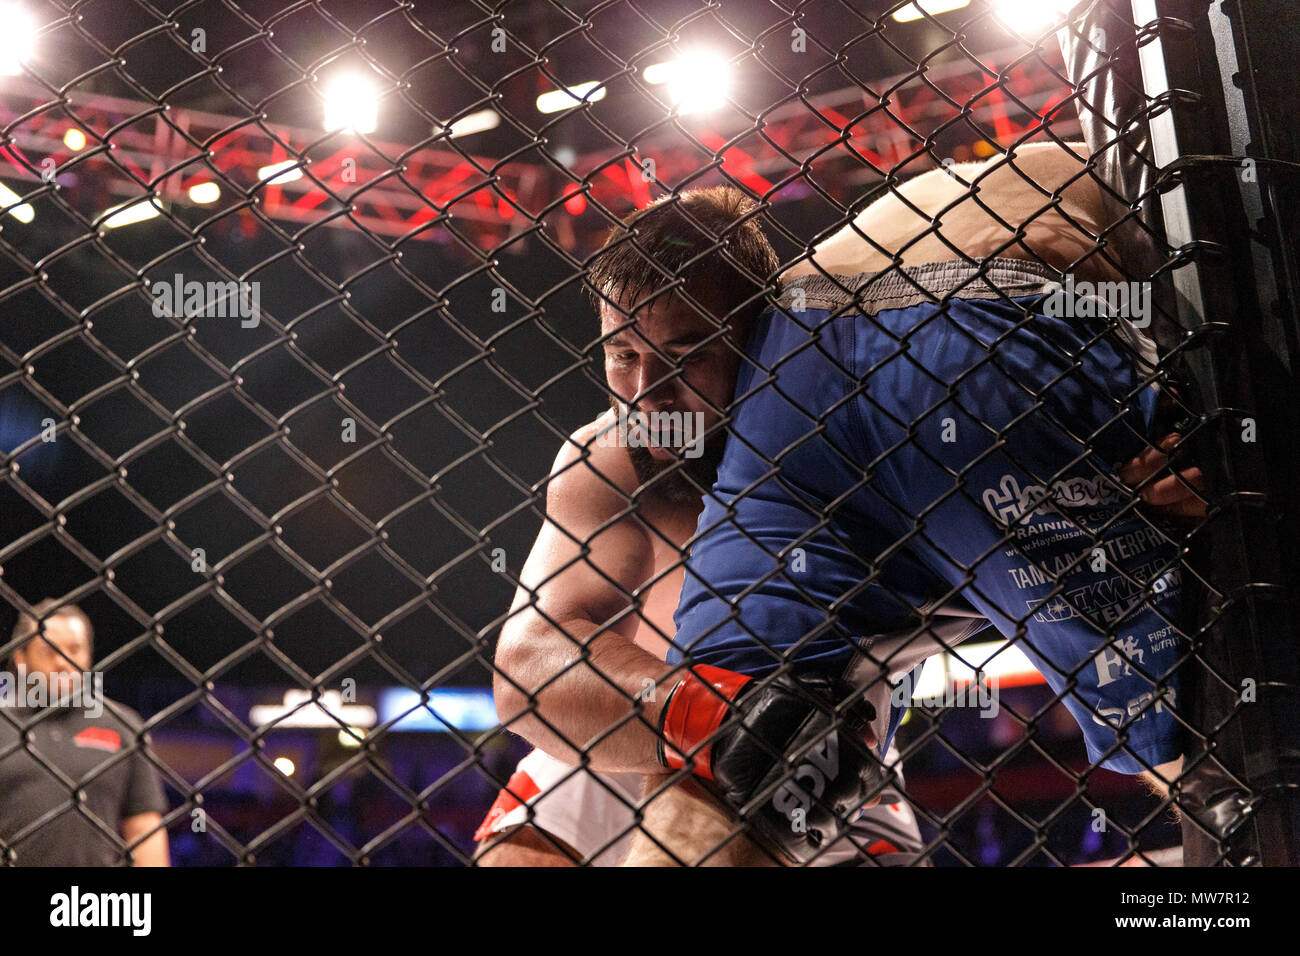 Mukhomad Vakhaev (close left, facing camera) holds Tanner Boser against the cage at ACB 54 in Manchester, UK. Absolute Championship Berkut, Mixed Martial Arts, MMA fight. Stock Photo